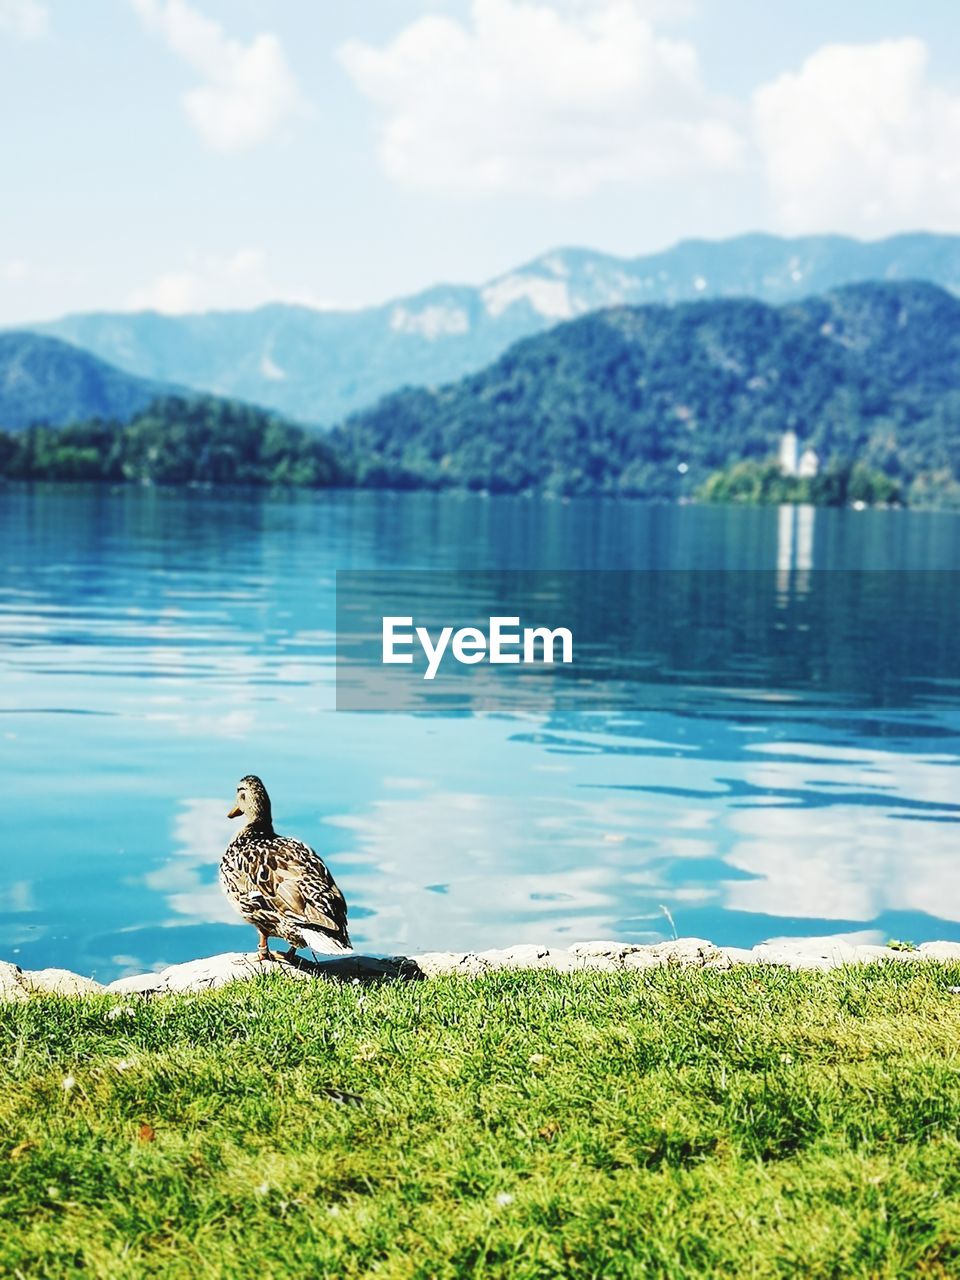 Bird on grass by lake against mountains and sky